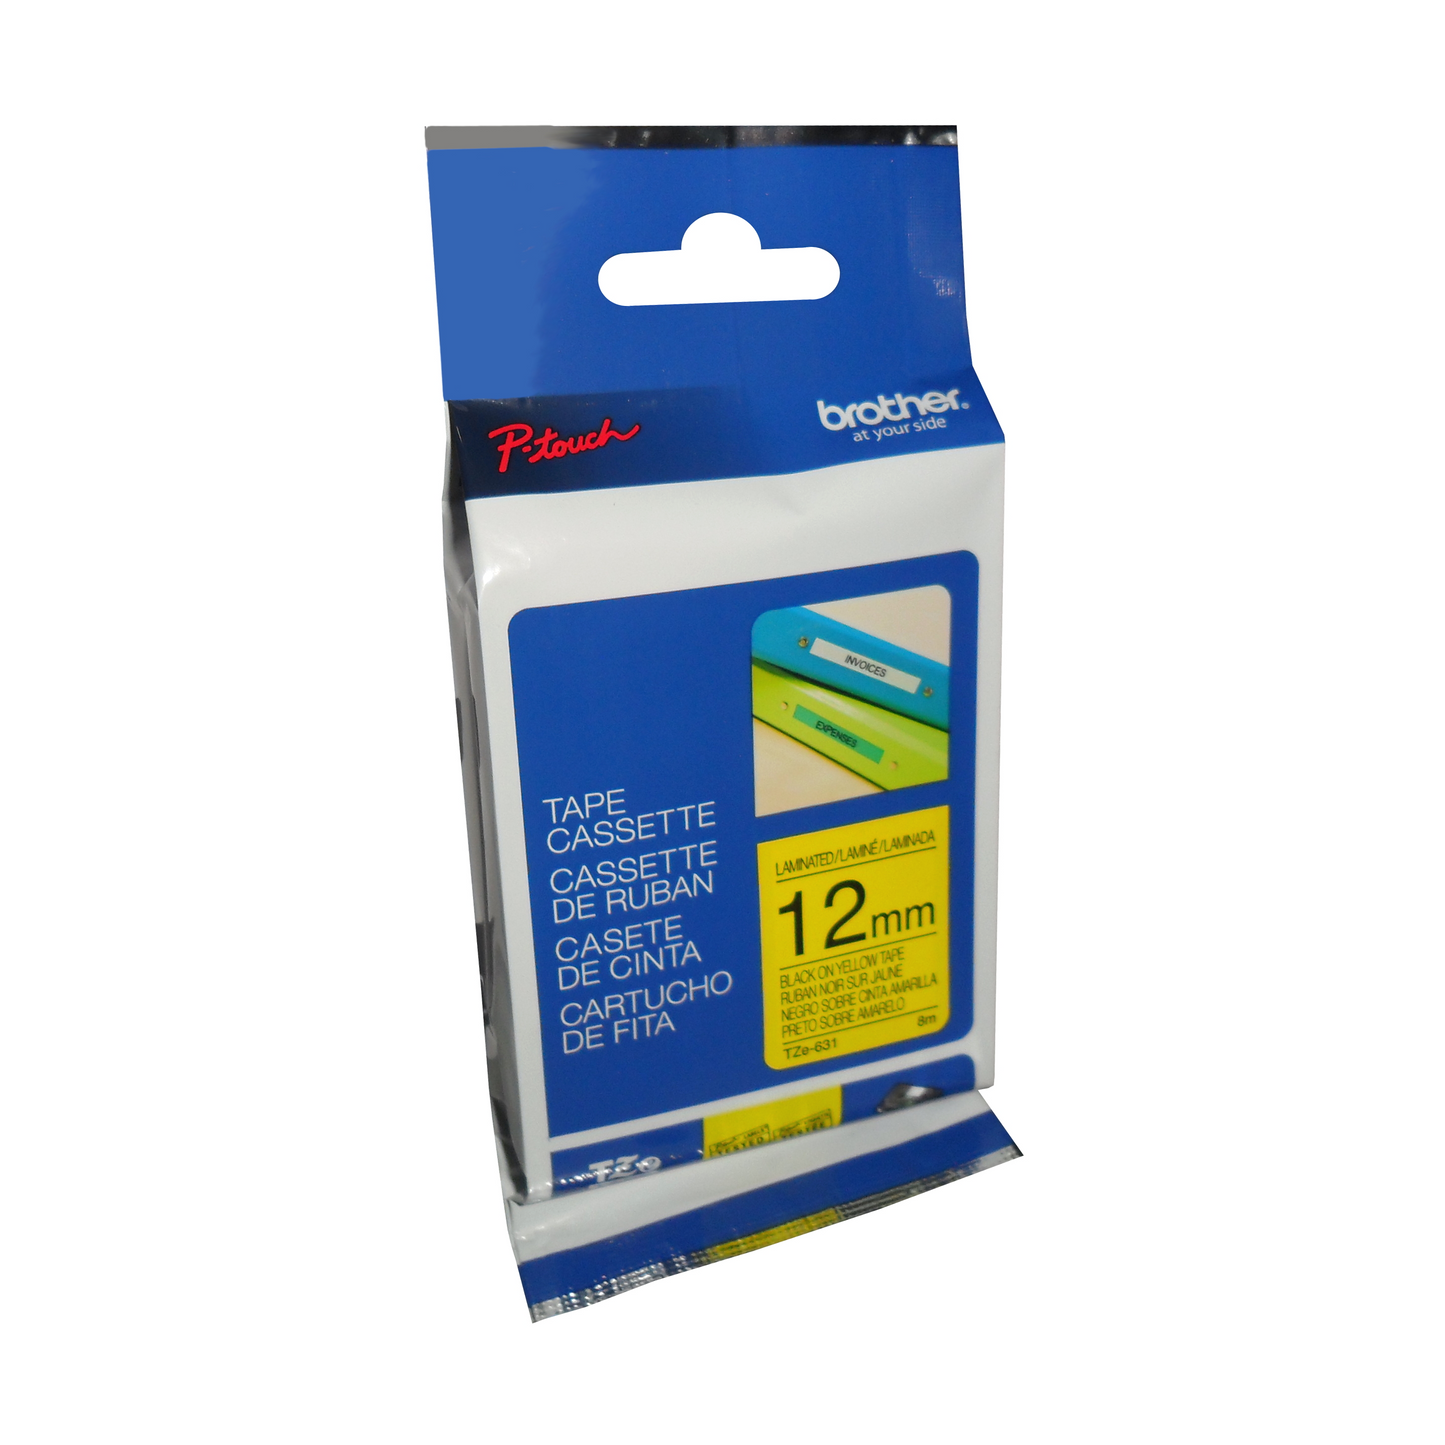 Brother Genuine TZe631 Black on Yellow Laminated Tape for P-touch Label Makers, 12 mm wide x 8 m long